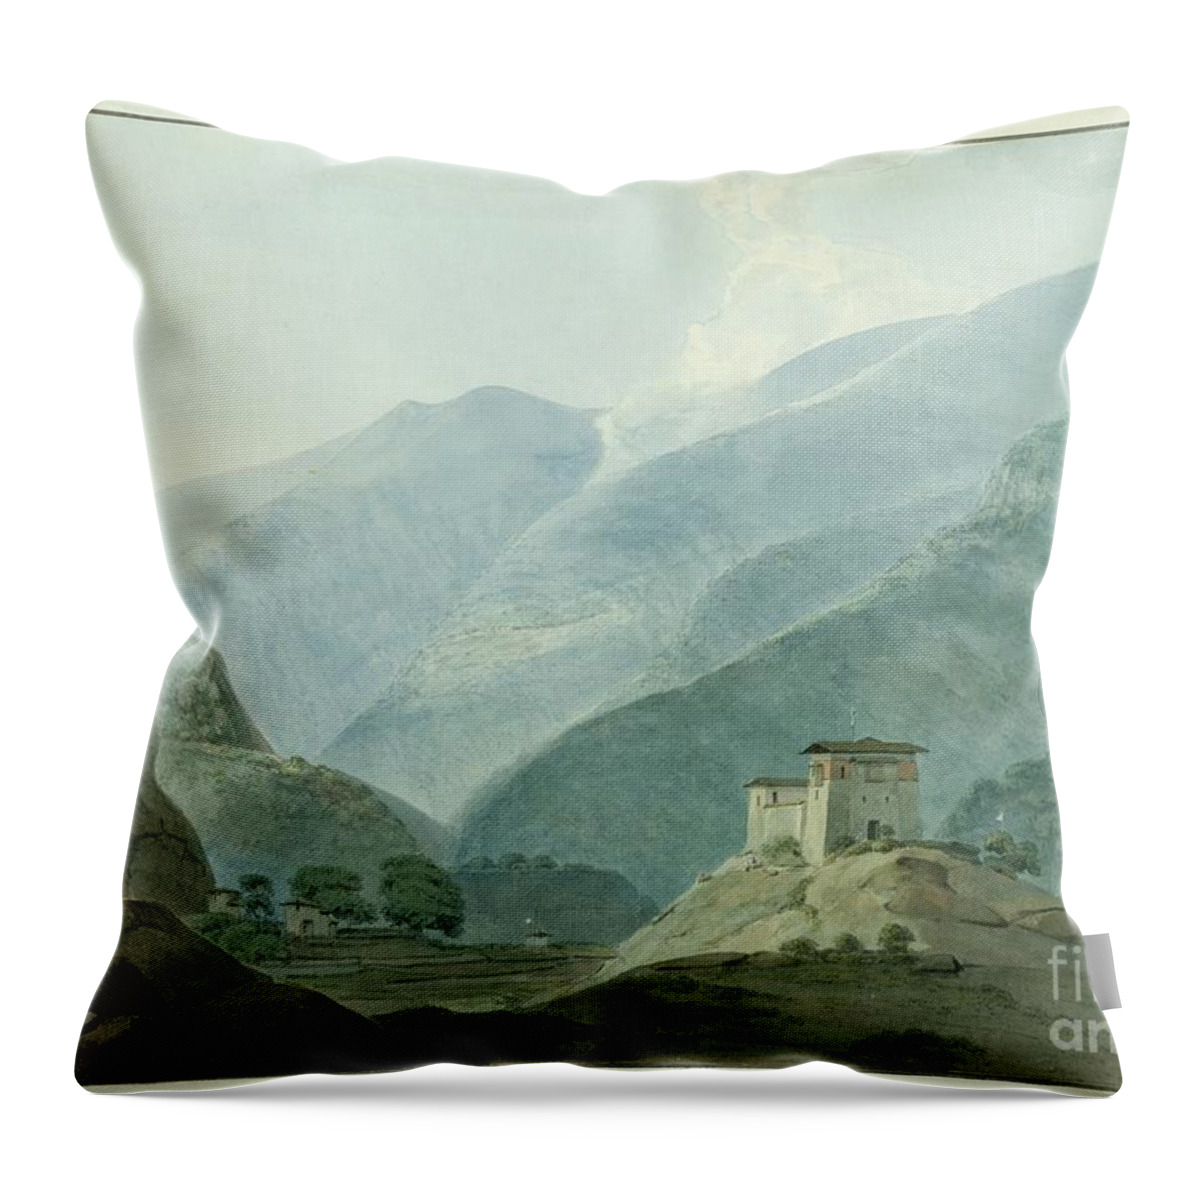 Cliff Throw Pillow featuring the painting Chukha Casle In Bhutan, 1783 by Samuel Davis